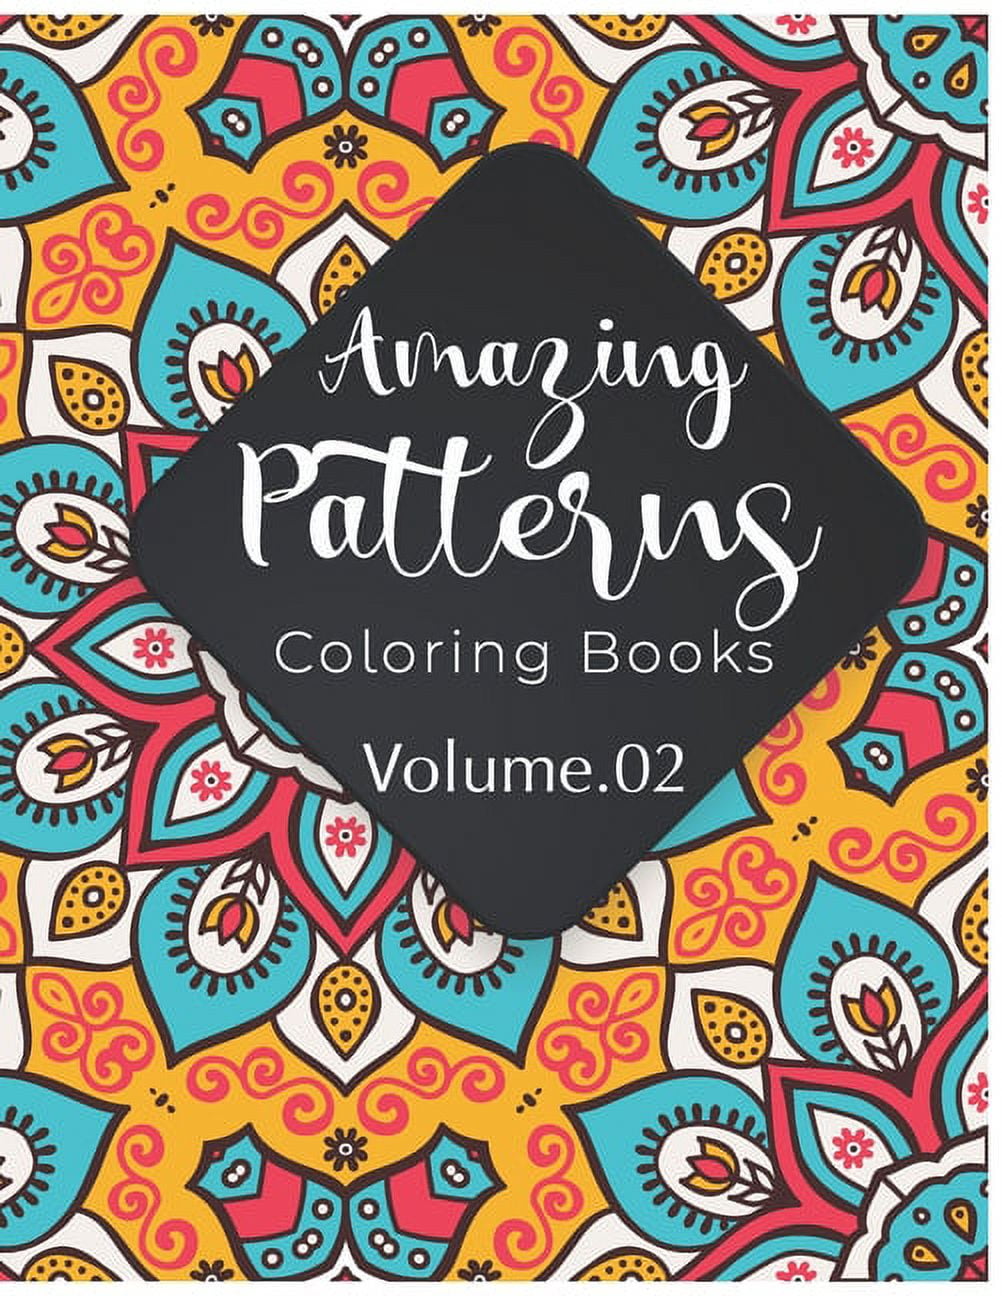 Top 10 Best Adult Coloring Books for Stress Relief and Relaxation